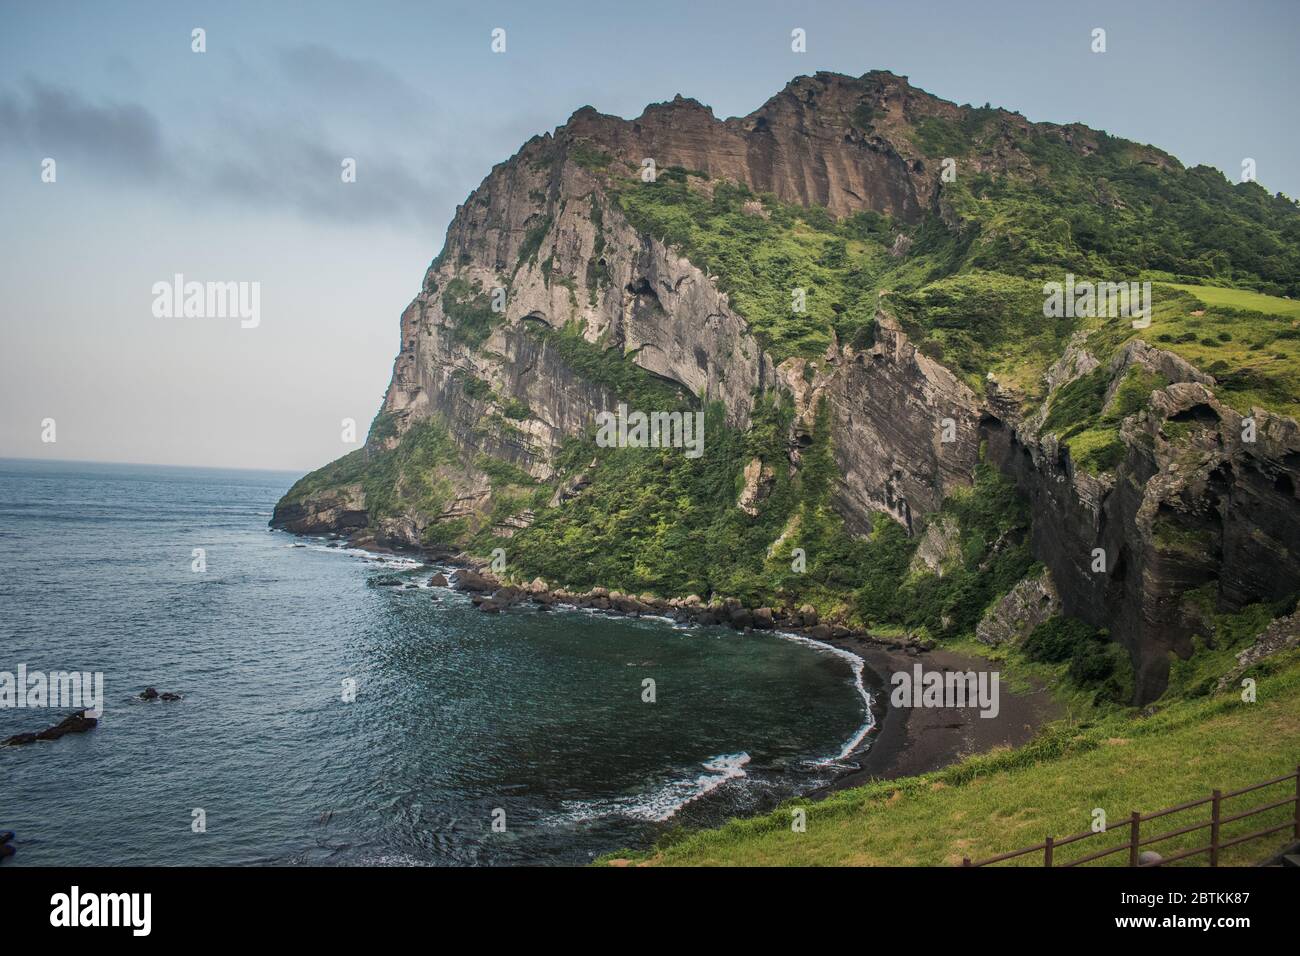 Sunrise Peak on Jeju Island in the city of Seongsan. This mountain is also known as Seongsan Ilchulbong. Stock Photo